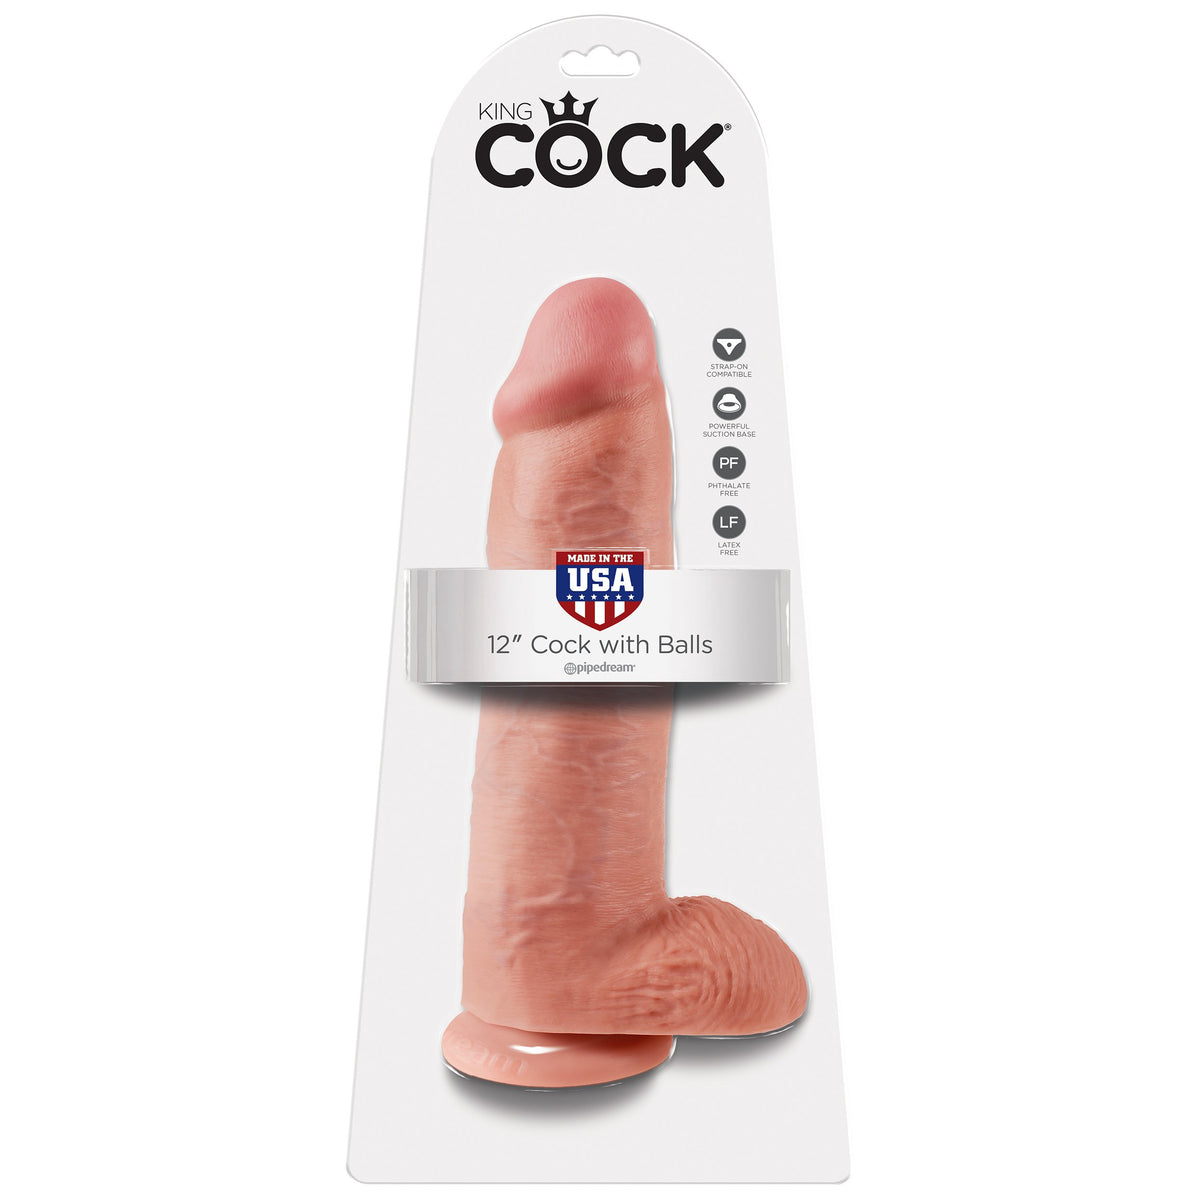 Pipedream Products King Cock 12 inch Cock with Balls Dildo